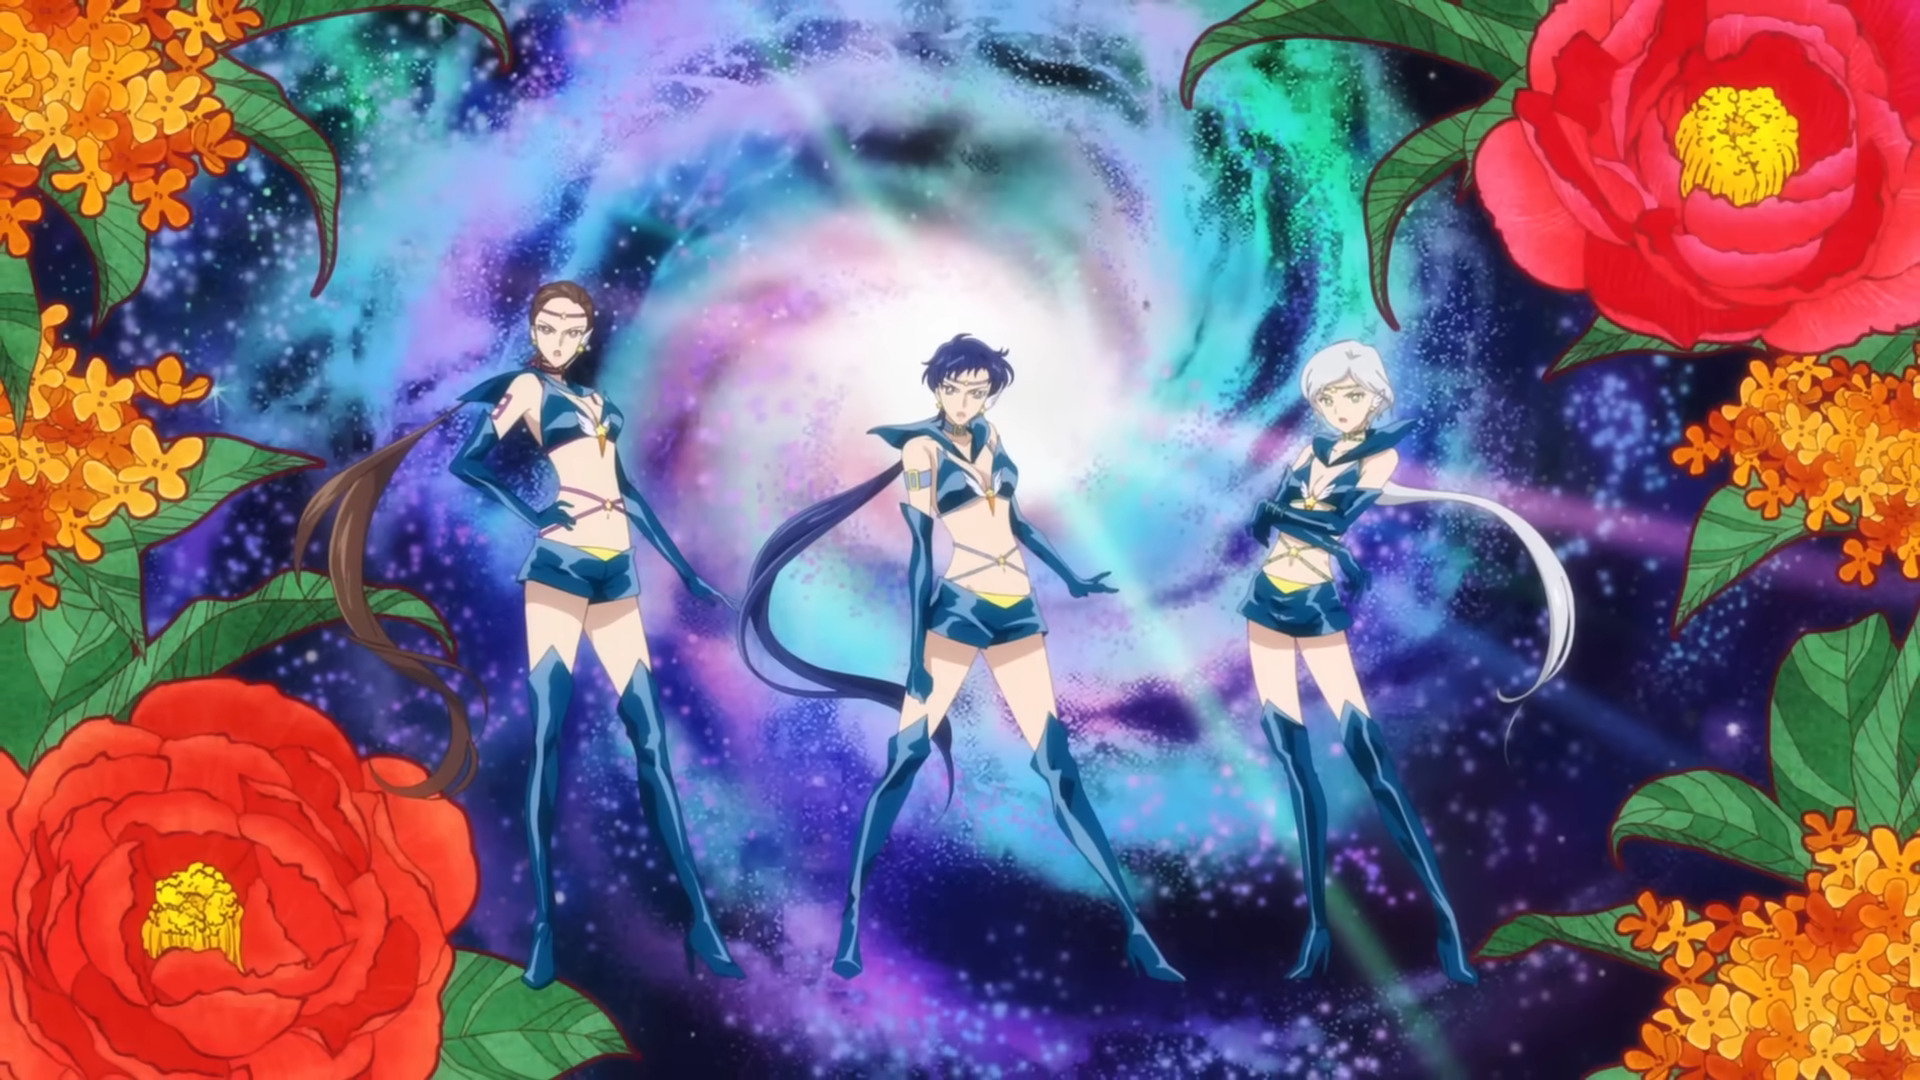 The Sailor Starlights make their debut in the trailer for Pretty Guardian Sailor Moon Cosmos (2023), Toei Animation